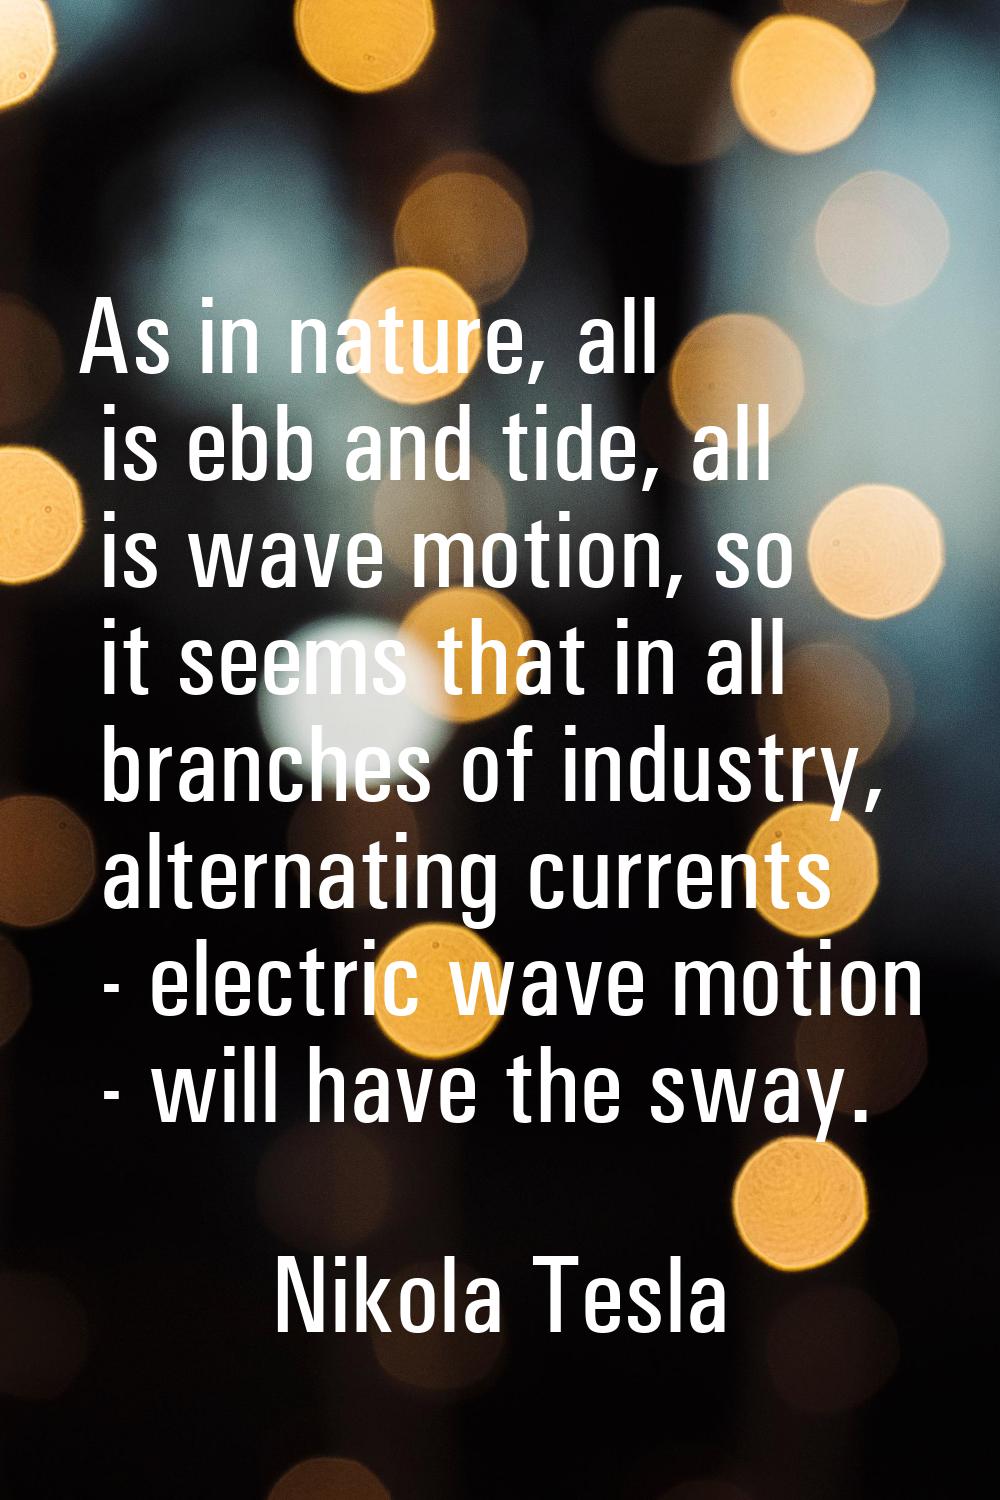 As in nature, all is ebb and tide, all is wave motion, so it seems that in all branches of industry